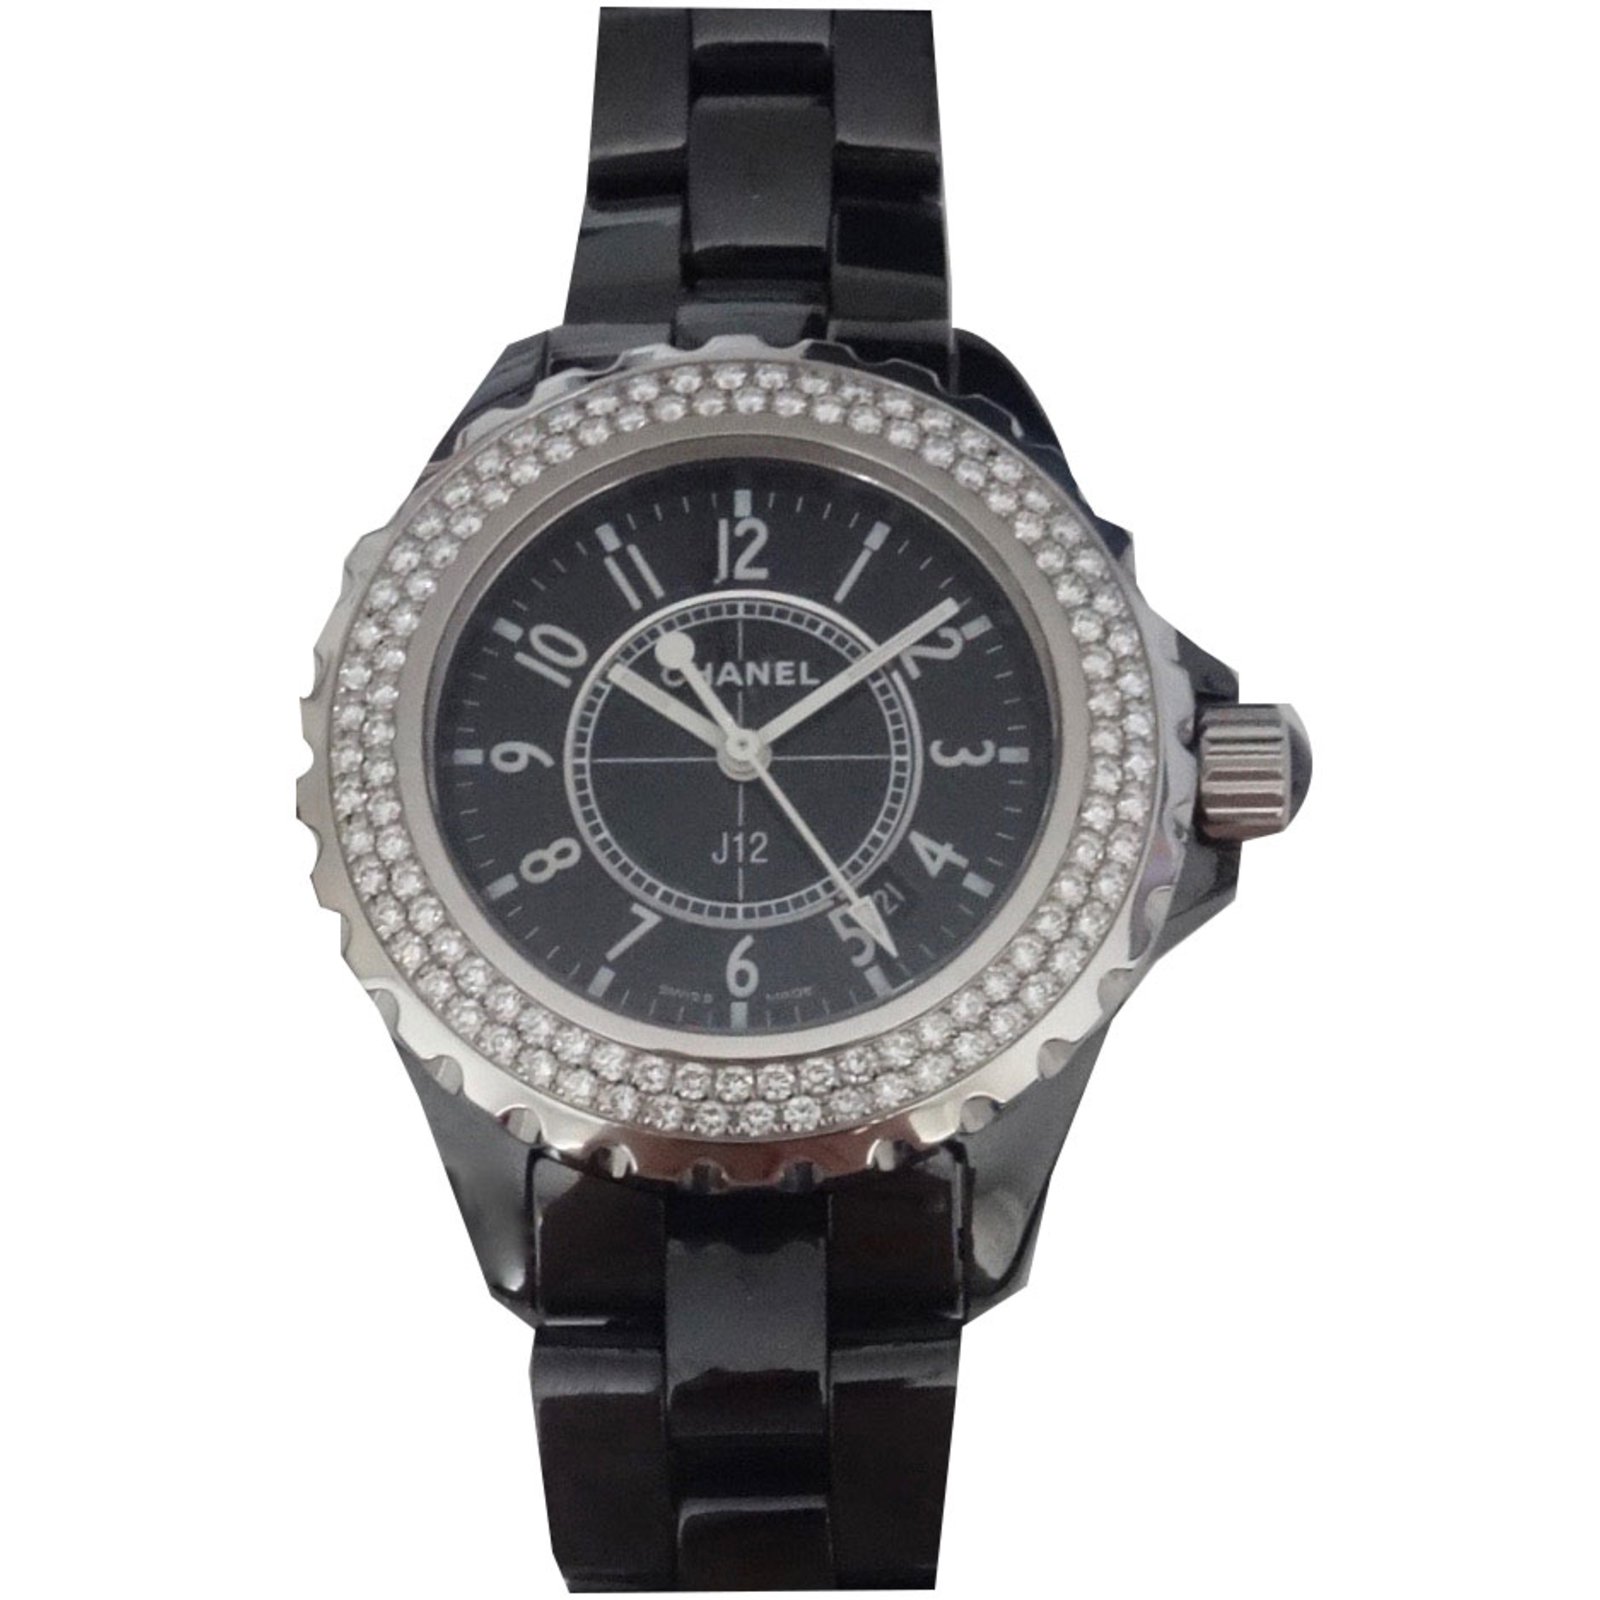 Chanel J 12 Black Large Size with Diamonds Watches